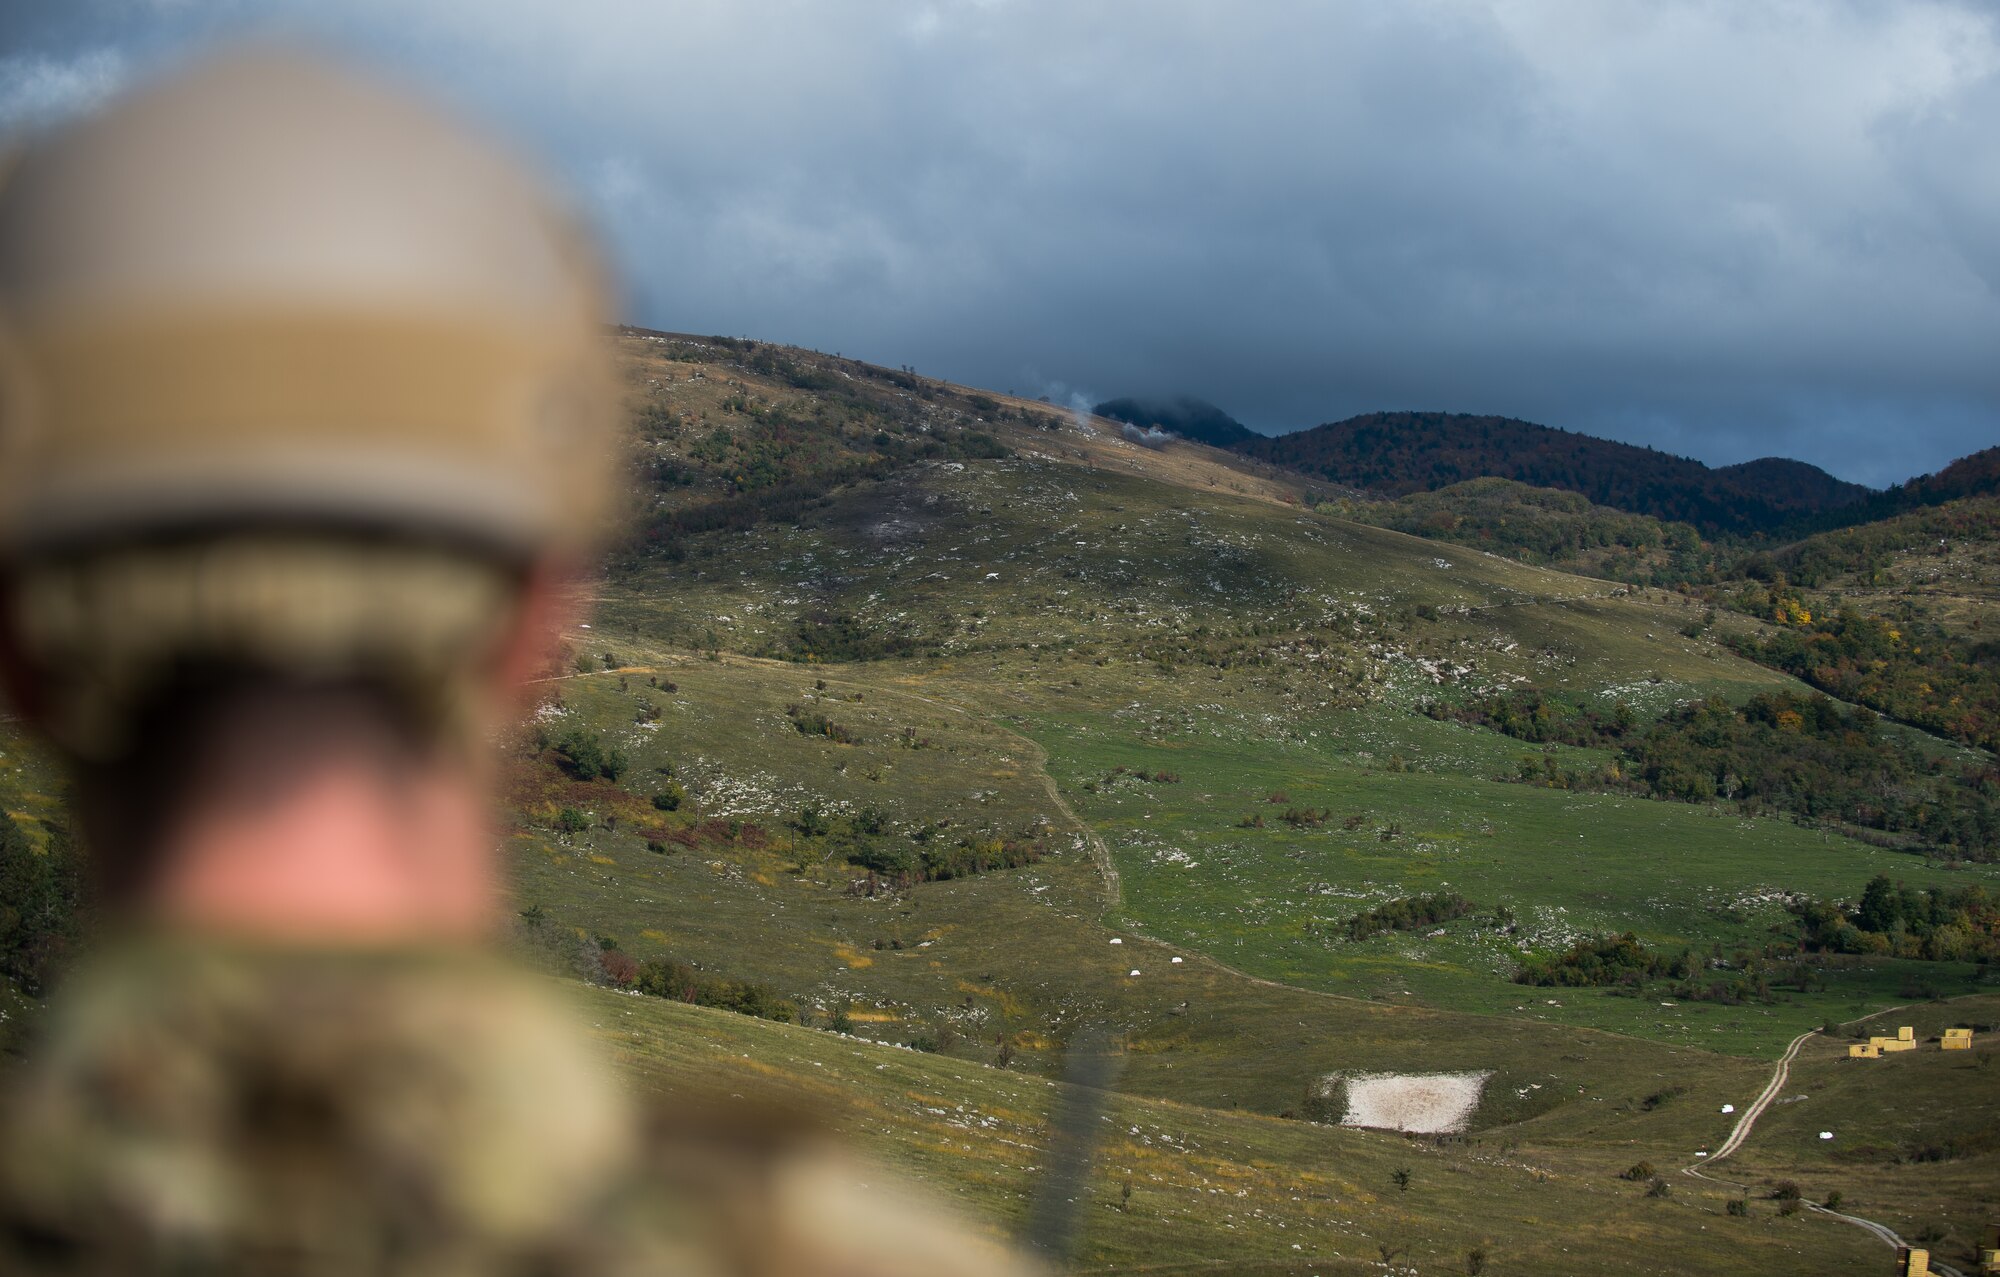 U.S. Air Force Senior Airman Gage Duvall, 2nd Air Support Operations Squadron joint terminal attack controller in training, watches artillery rounds land during Rock Proof V Oct. 16, 2015, at Pocek Training Range, near Postojna, Slovenia. Rock Proof is a U.S. Army multilateral exercise designed to improve interoperability between U.S and Slovenian militaries. (U.S. Air Force photo/Staff Sgt. Armando A. Schwier-Morales) 